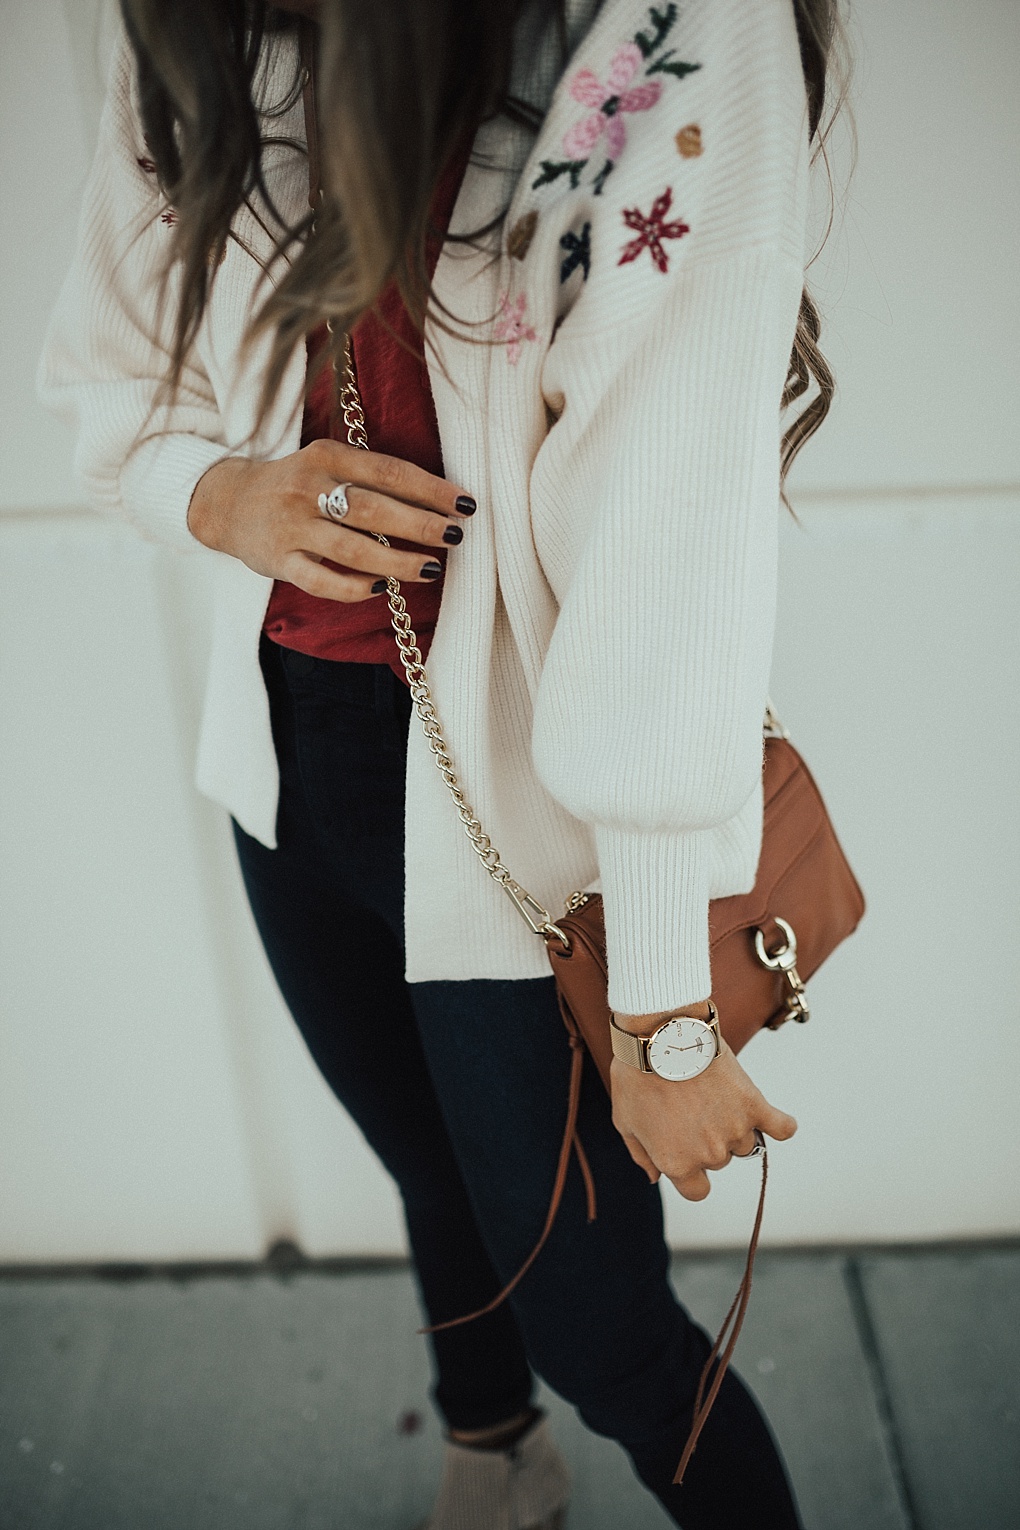 The Embroidered Cardigan Your Grandma Has & You Need Too by popular Utah style blogger Dani Marie